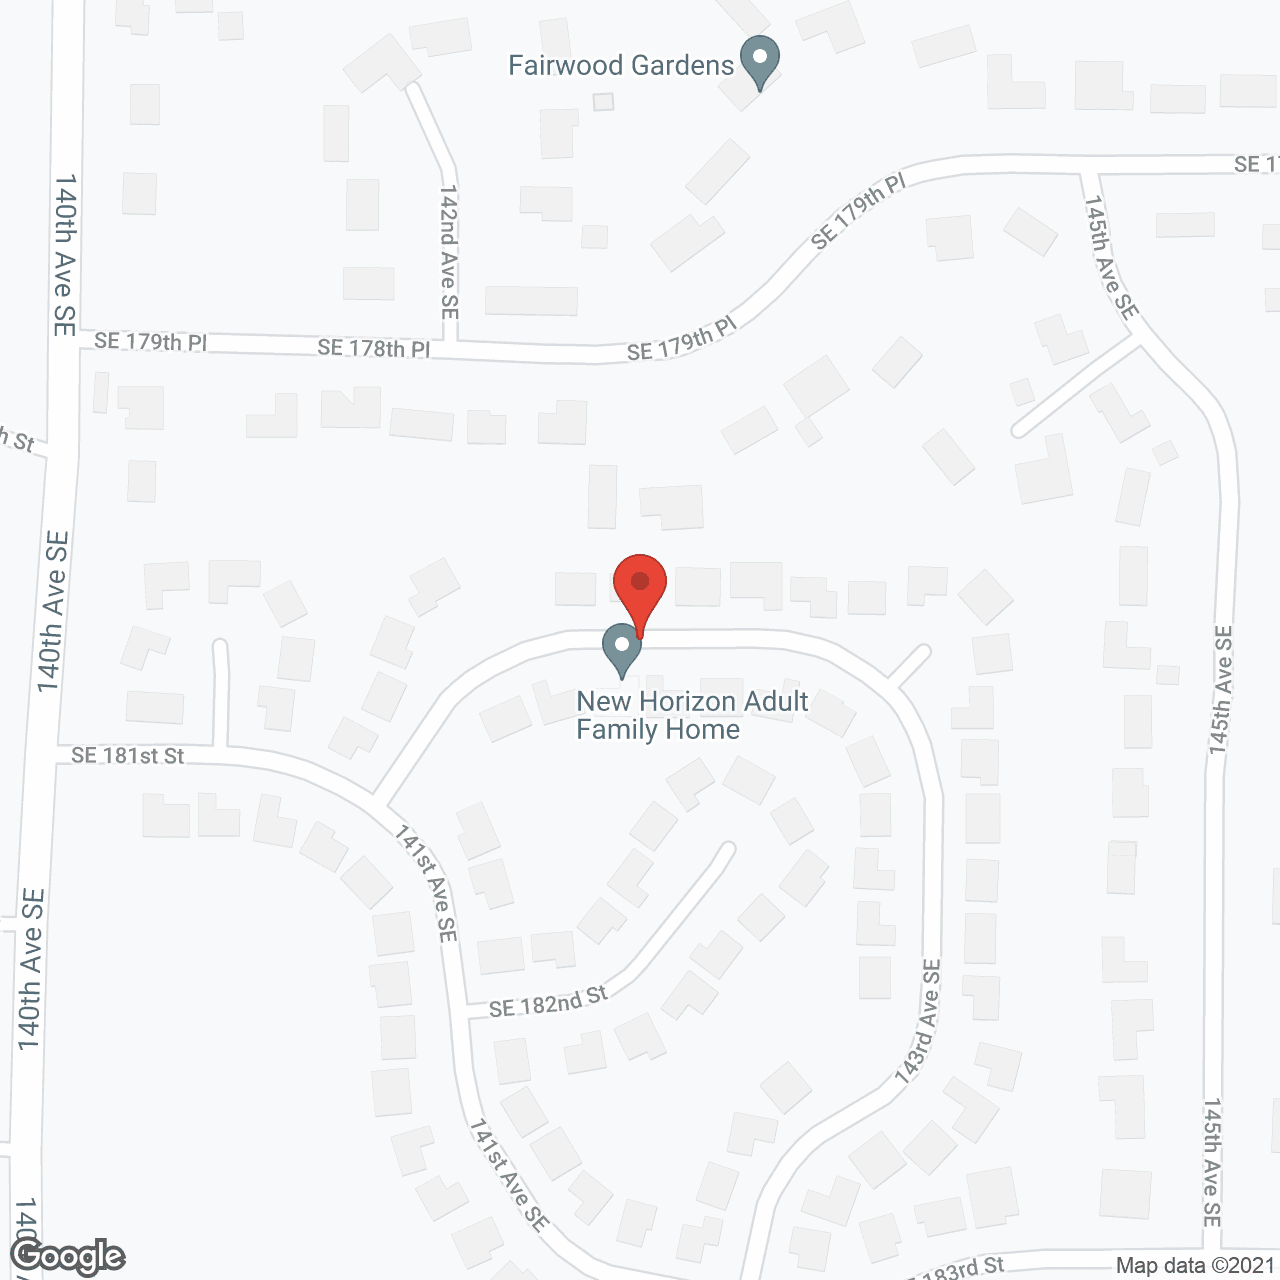 New Horizon Adult Family Home in google map